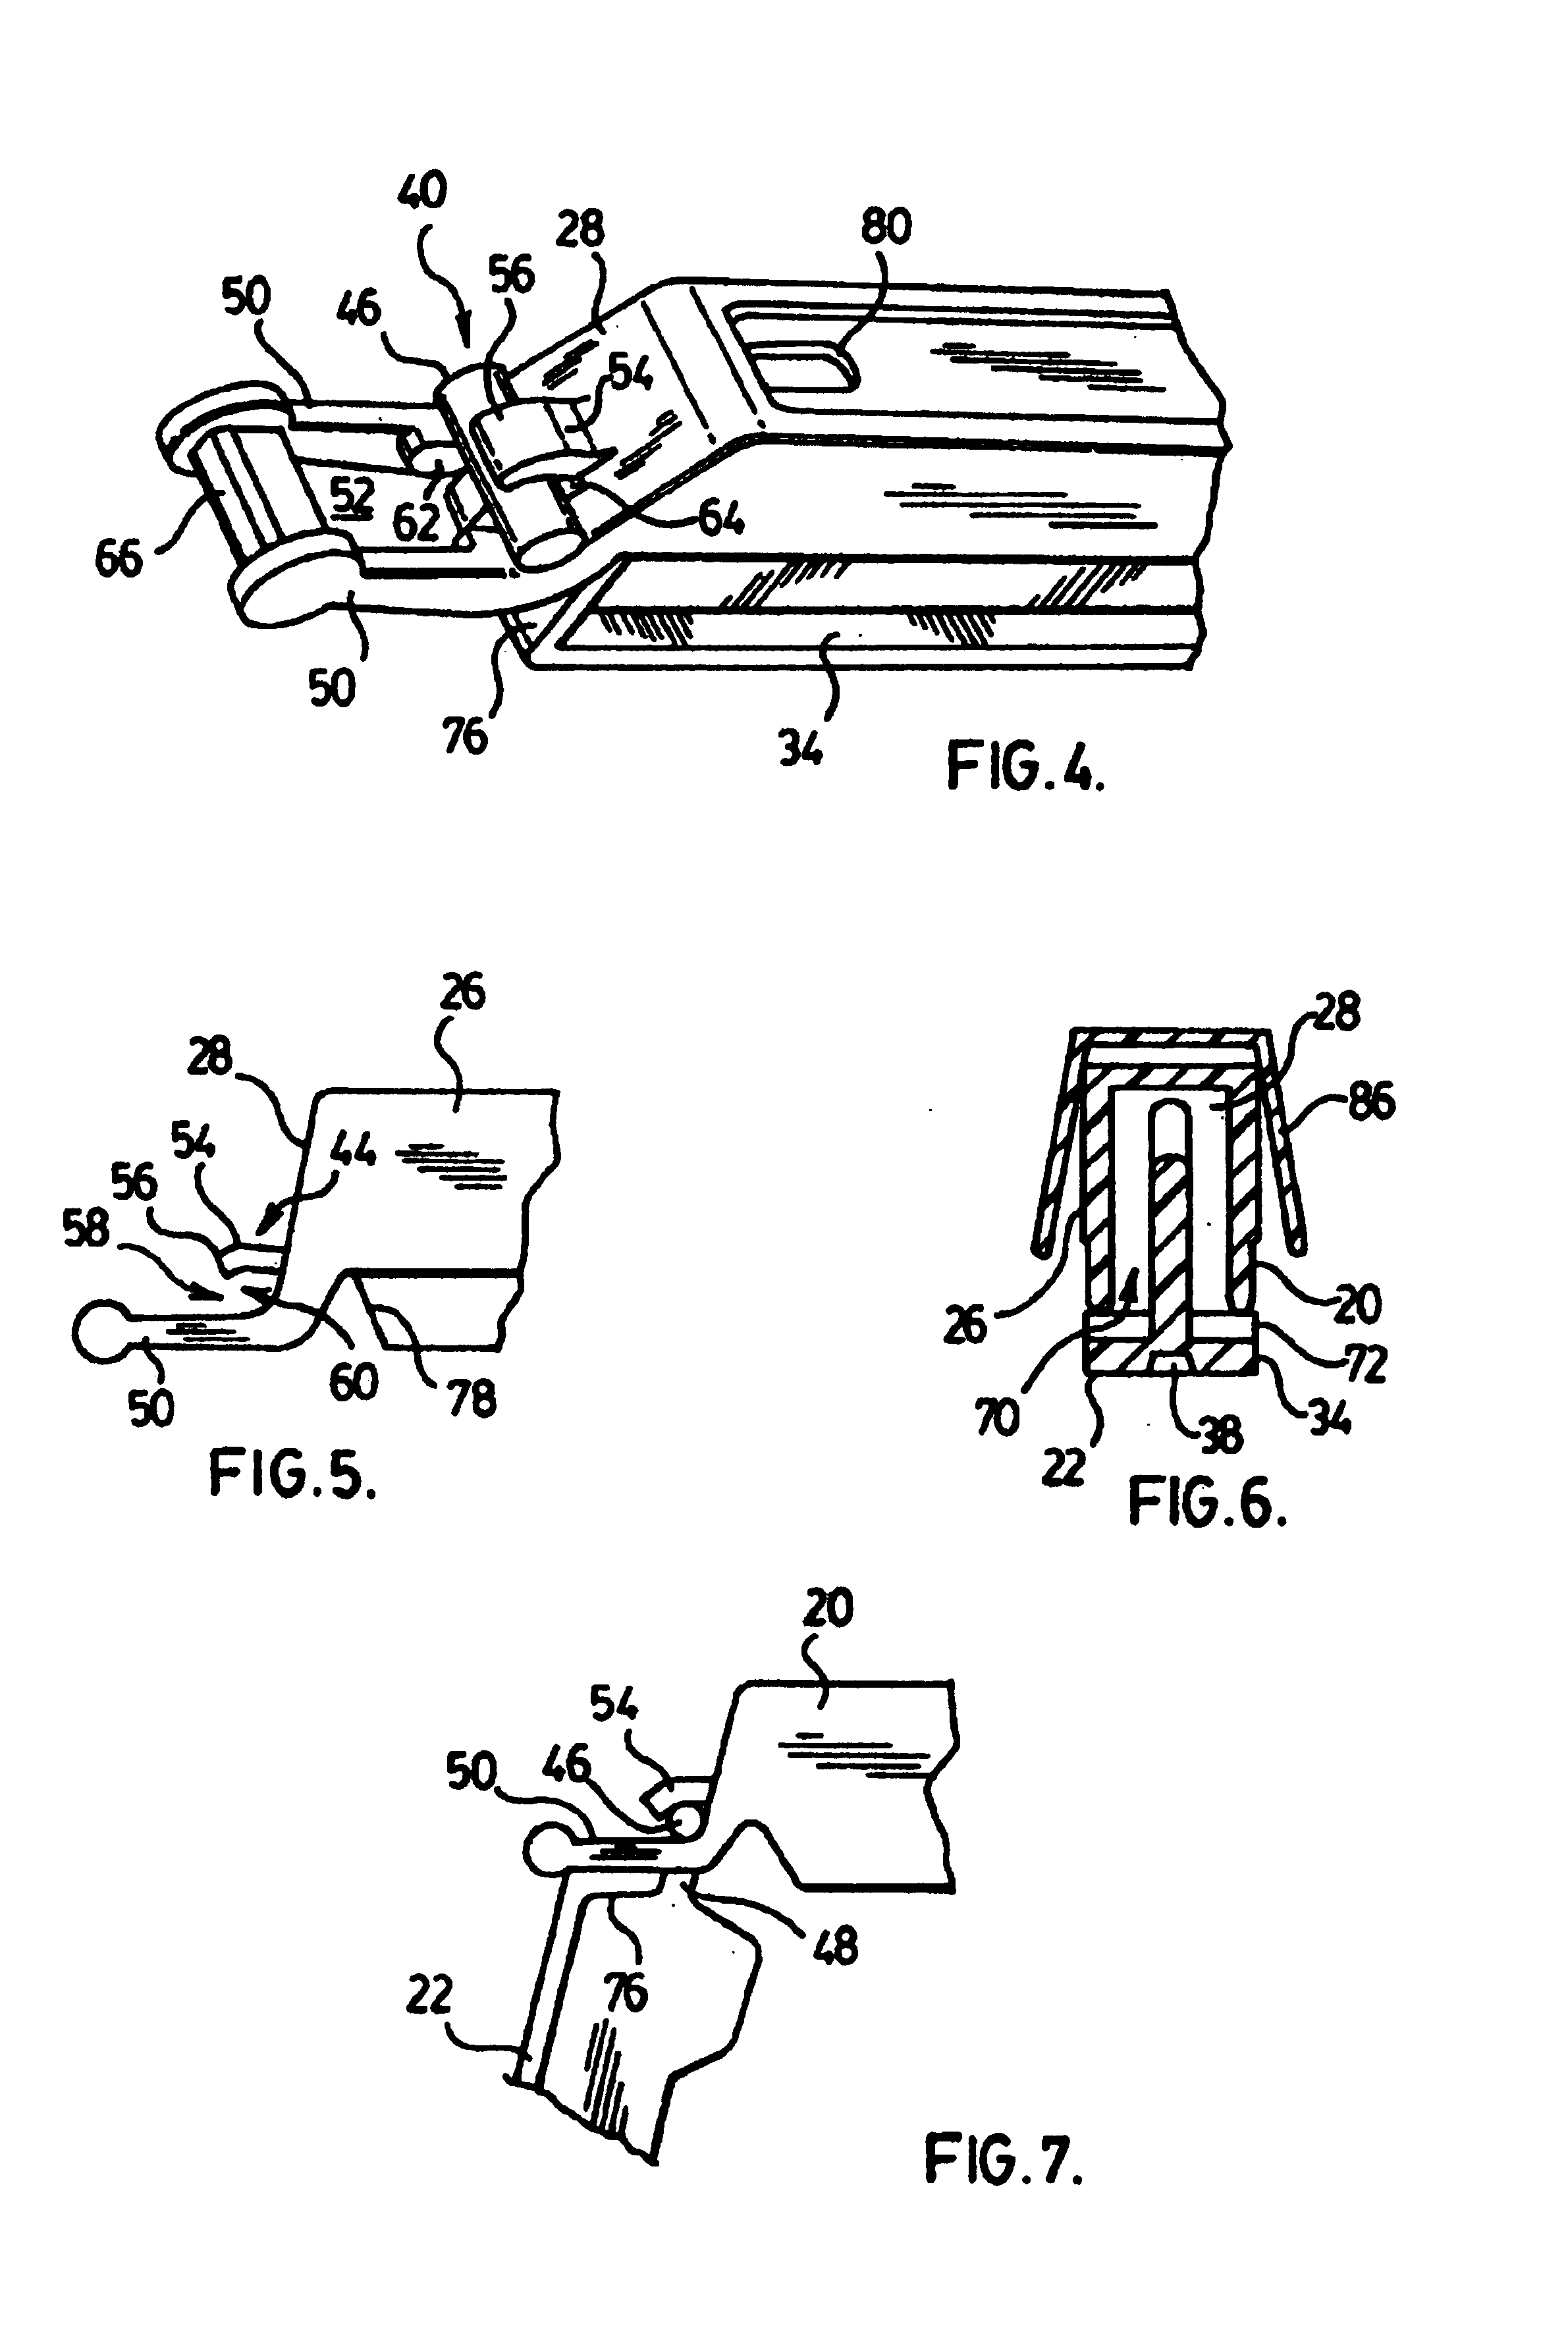 Hinged clip with separable jaws